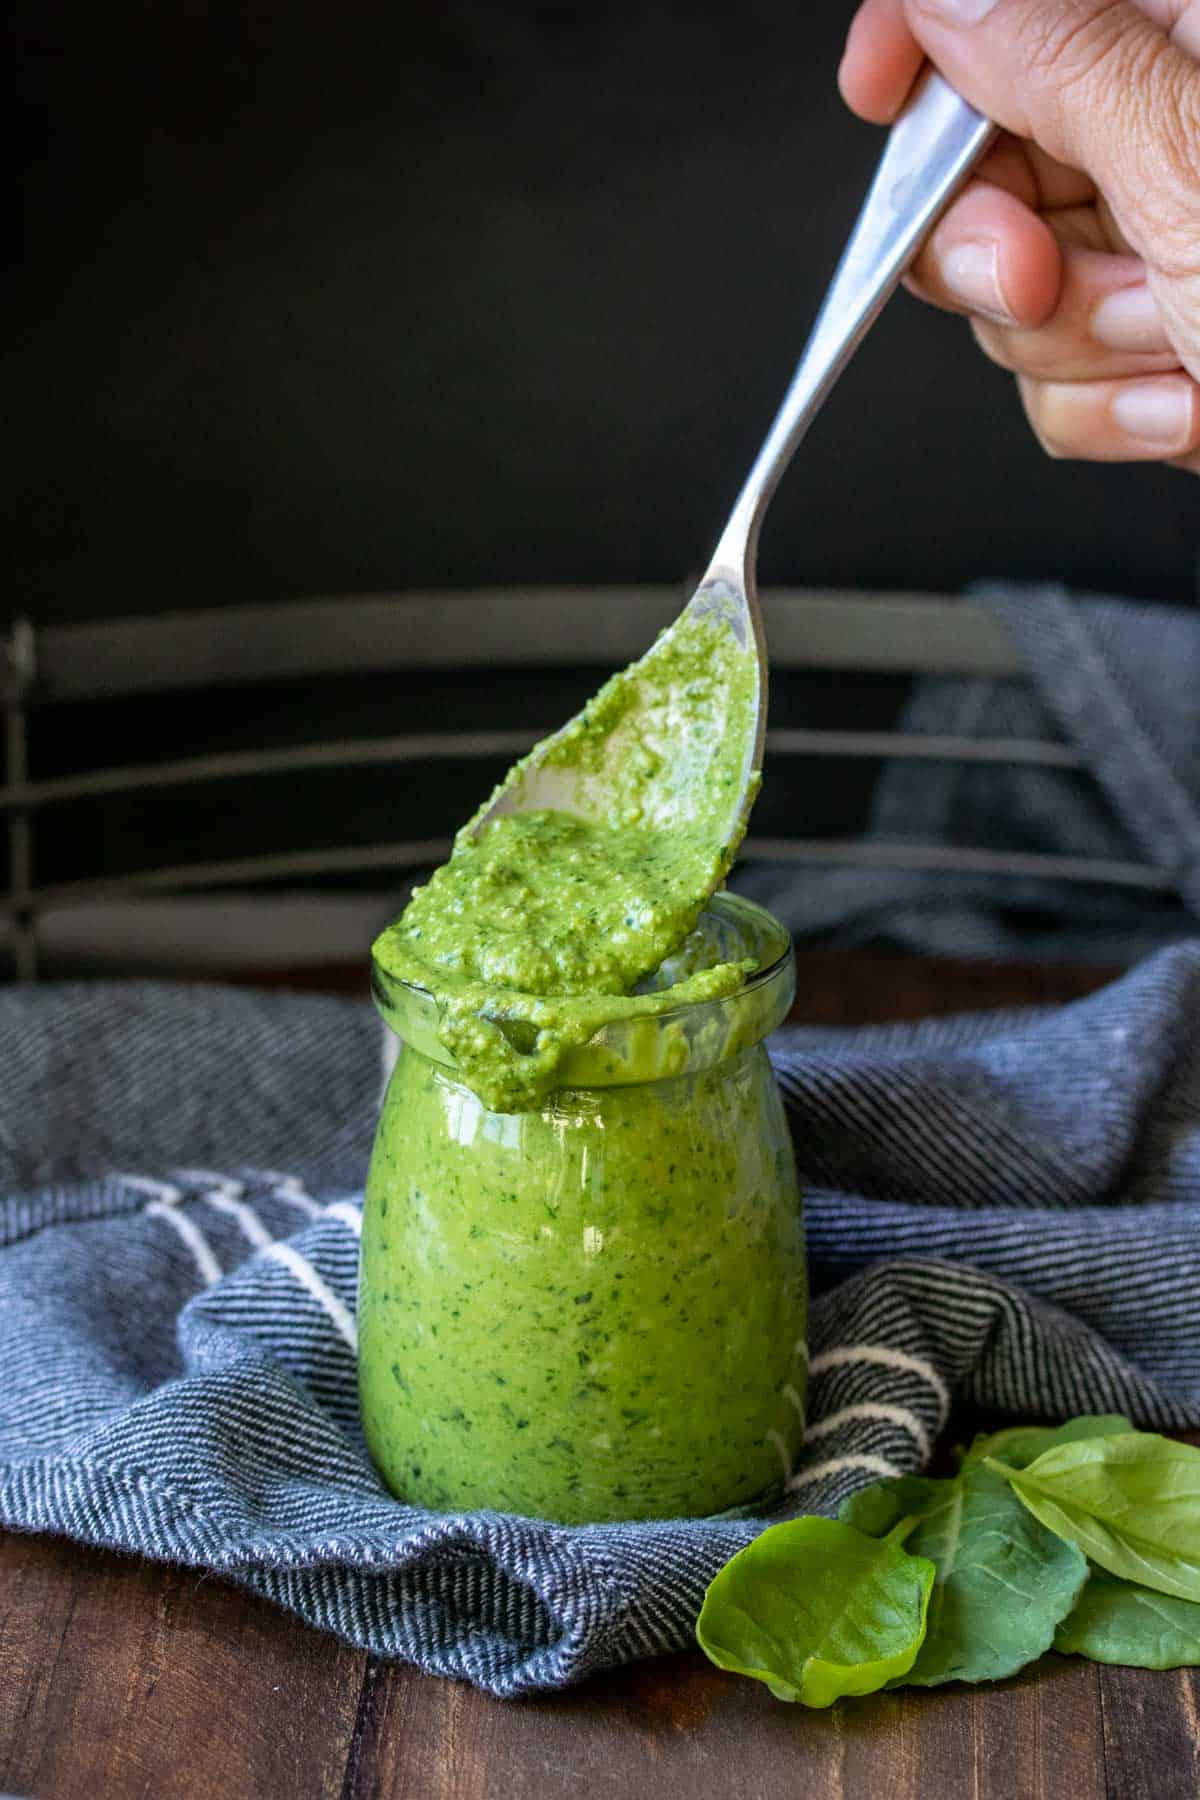 Spoon coming out of a glass jar with pesto inside